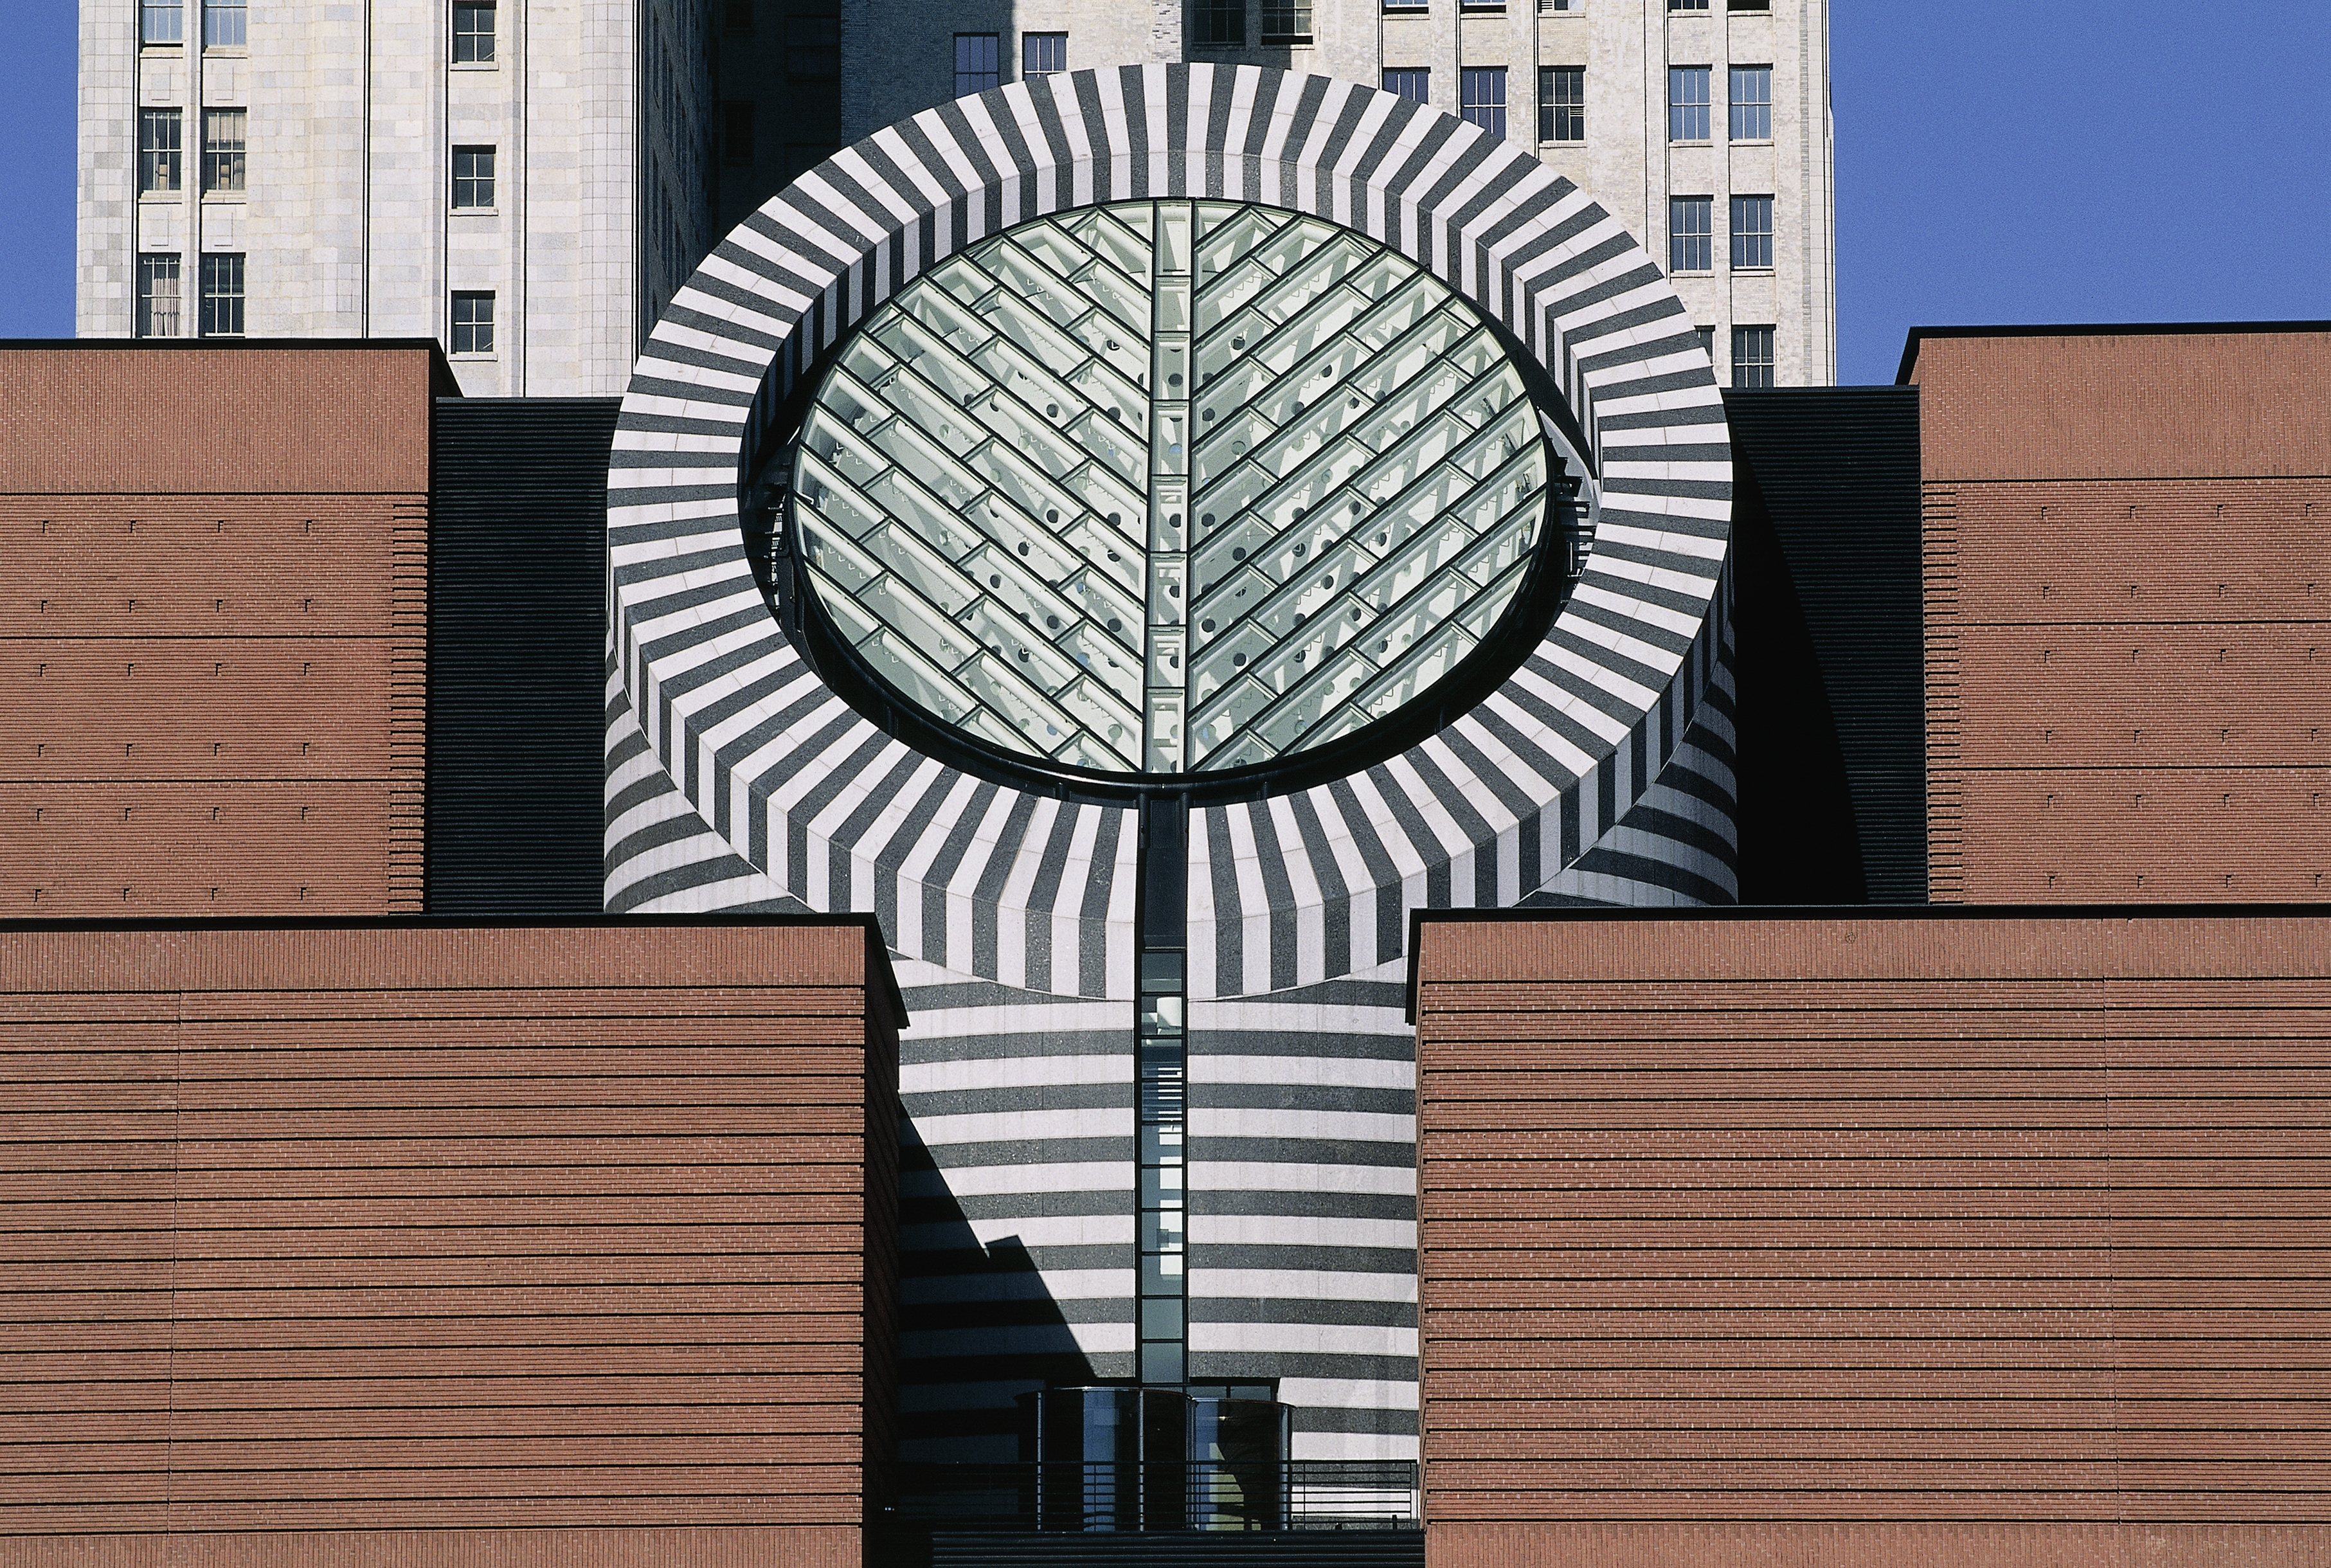 San Francisco Museum of Modern Art facade with a patterned column.